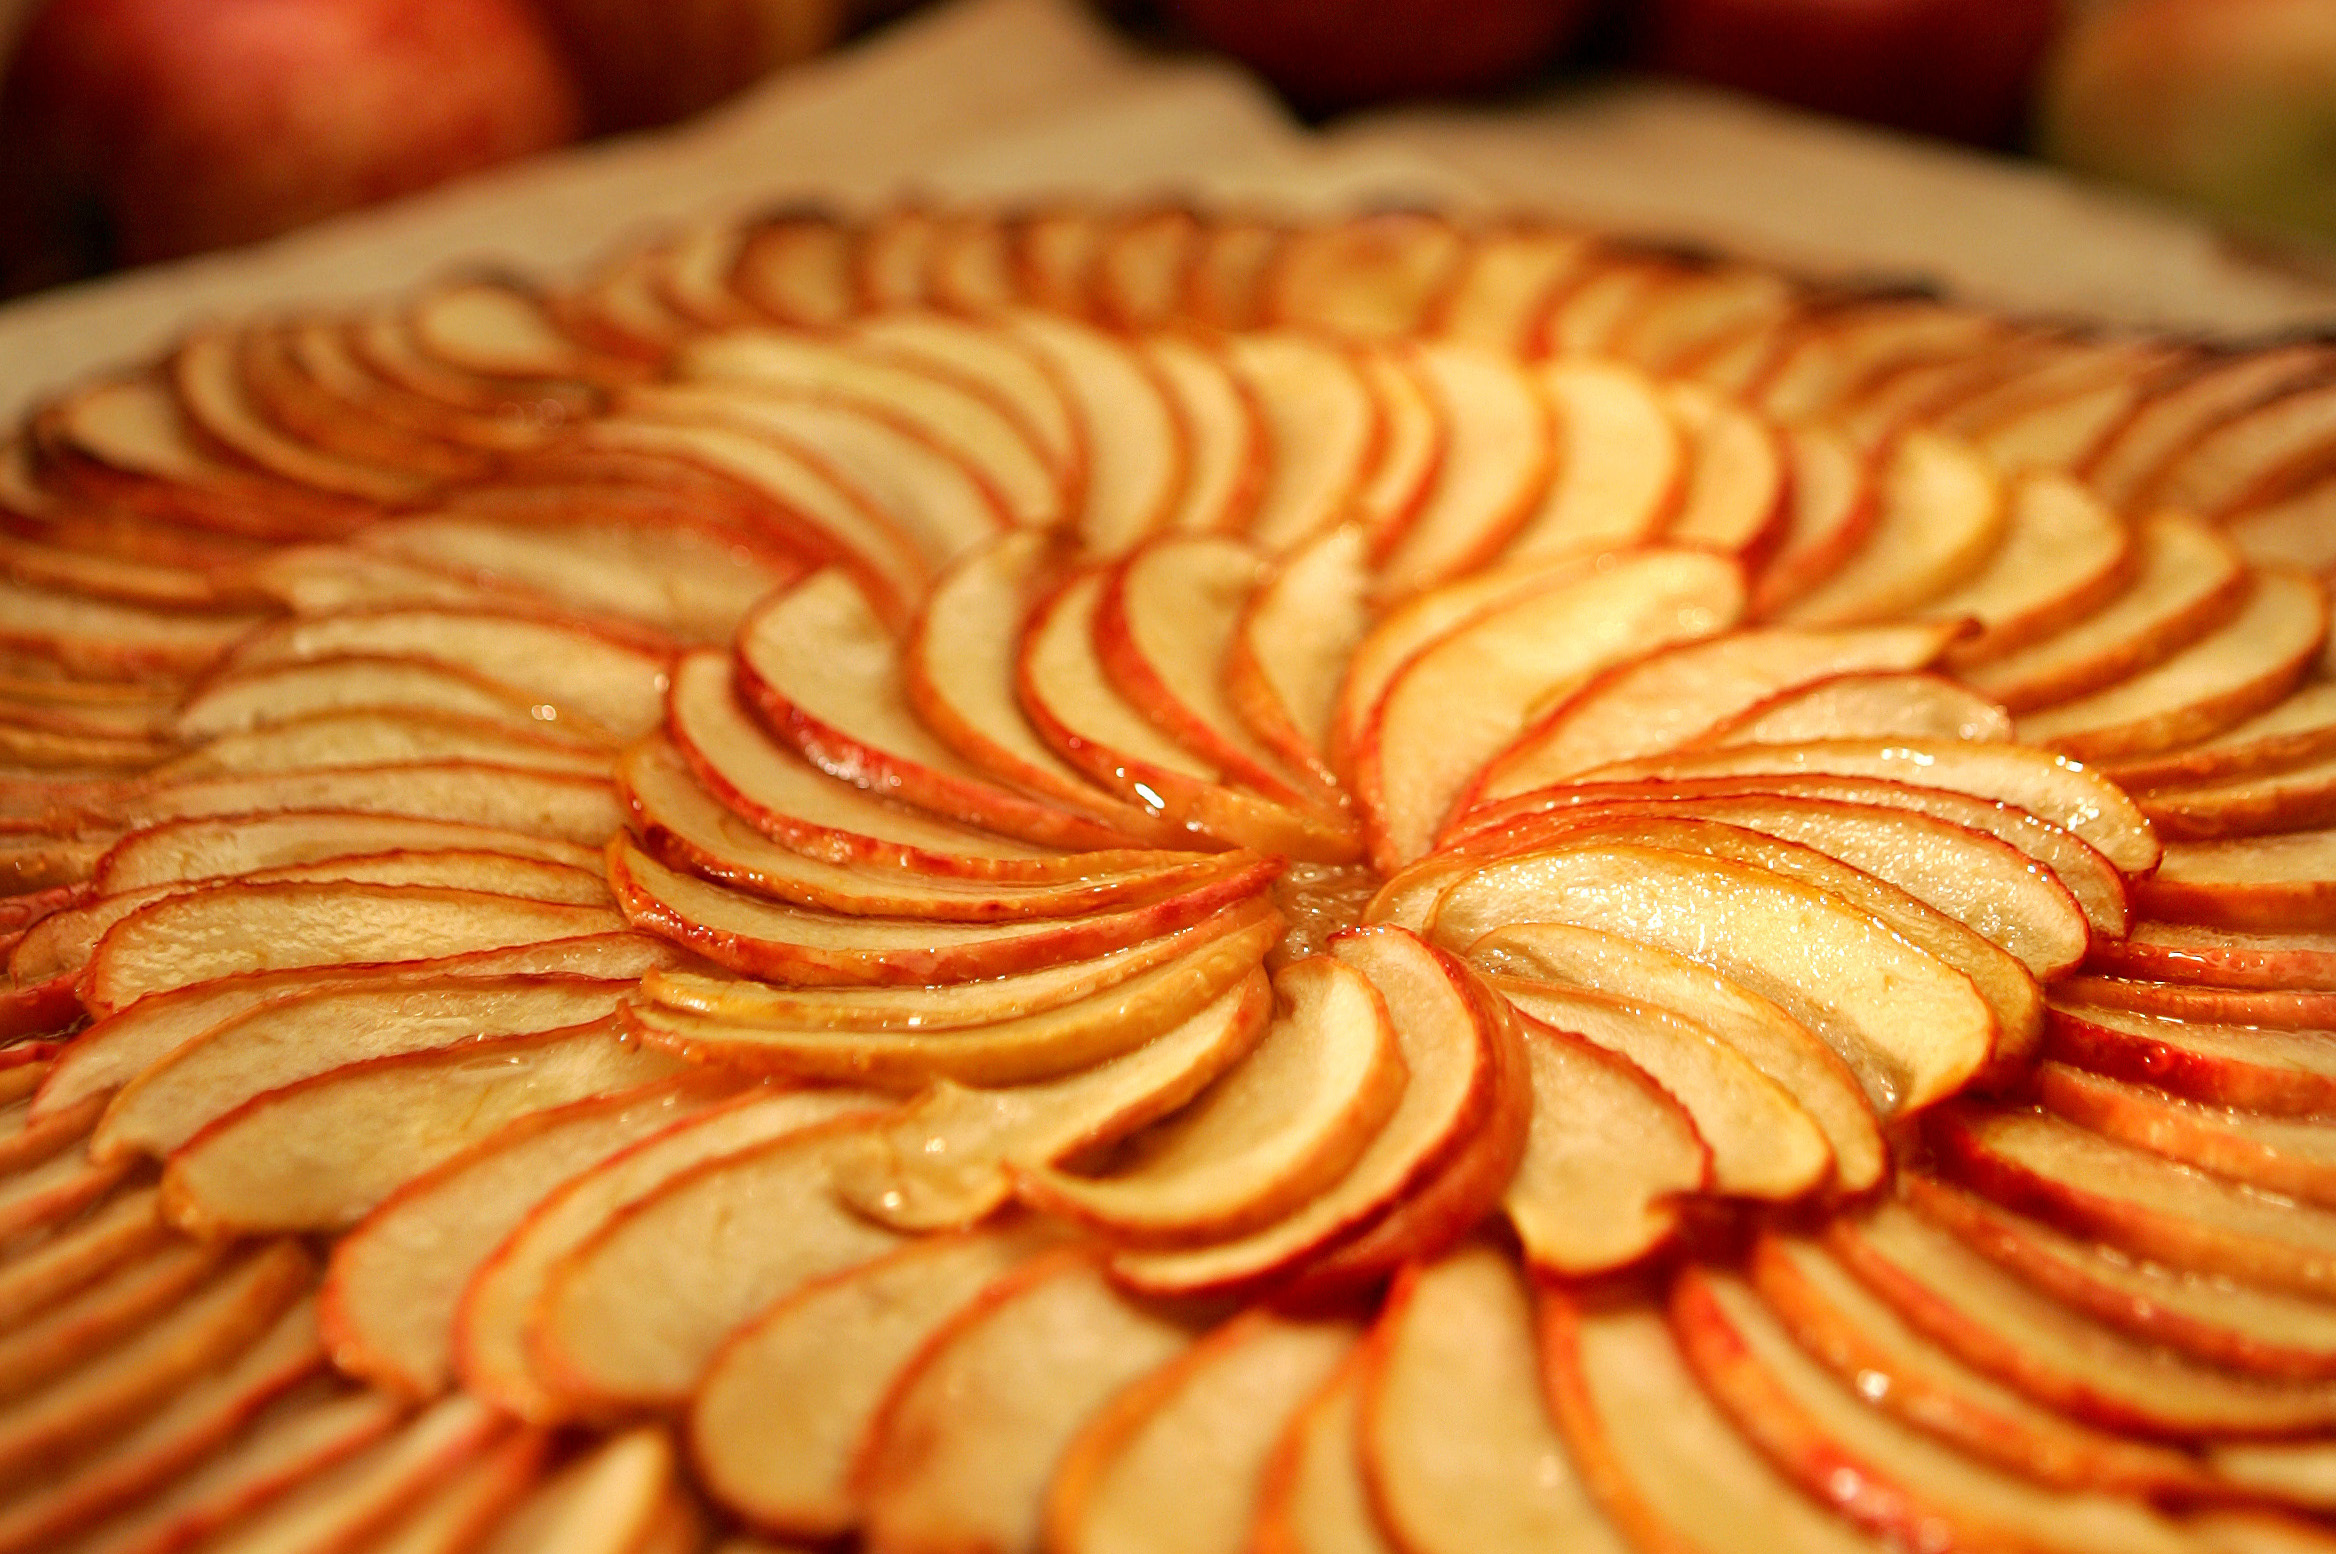 <p>Few things are as impressive as a perfectly spiraled apple galatte. But if you're like us, making a rustic "freeform" galette is more your speed. (It's not messy, it's "artisanal.") <a href="http://www.countryliving.com/food-drinks/recipes/a3454/rustic-apple-galette-recipe-clv0910/">Country Living has a recipe that hasn't failed us ye</a>t.  </p><p><a href='https://www.msn.com/en-us/community/channel/vid-cj9pqbr0vn9in2b6ddcd8sfgpfq6x6utp44fssrv6mc2gtybw0us'>Follow us on MSN to see more of our exclusive lifestyle content.</a></p>